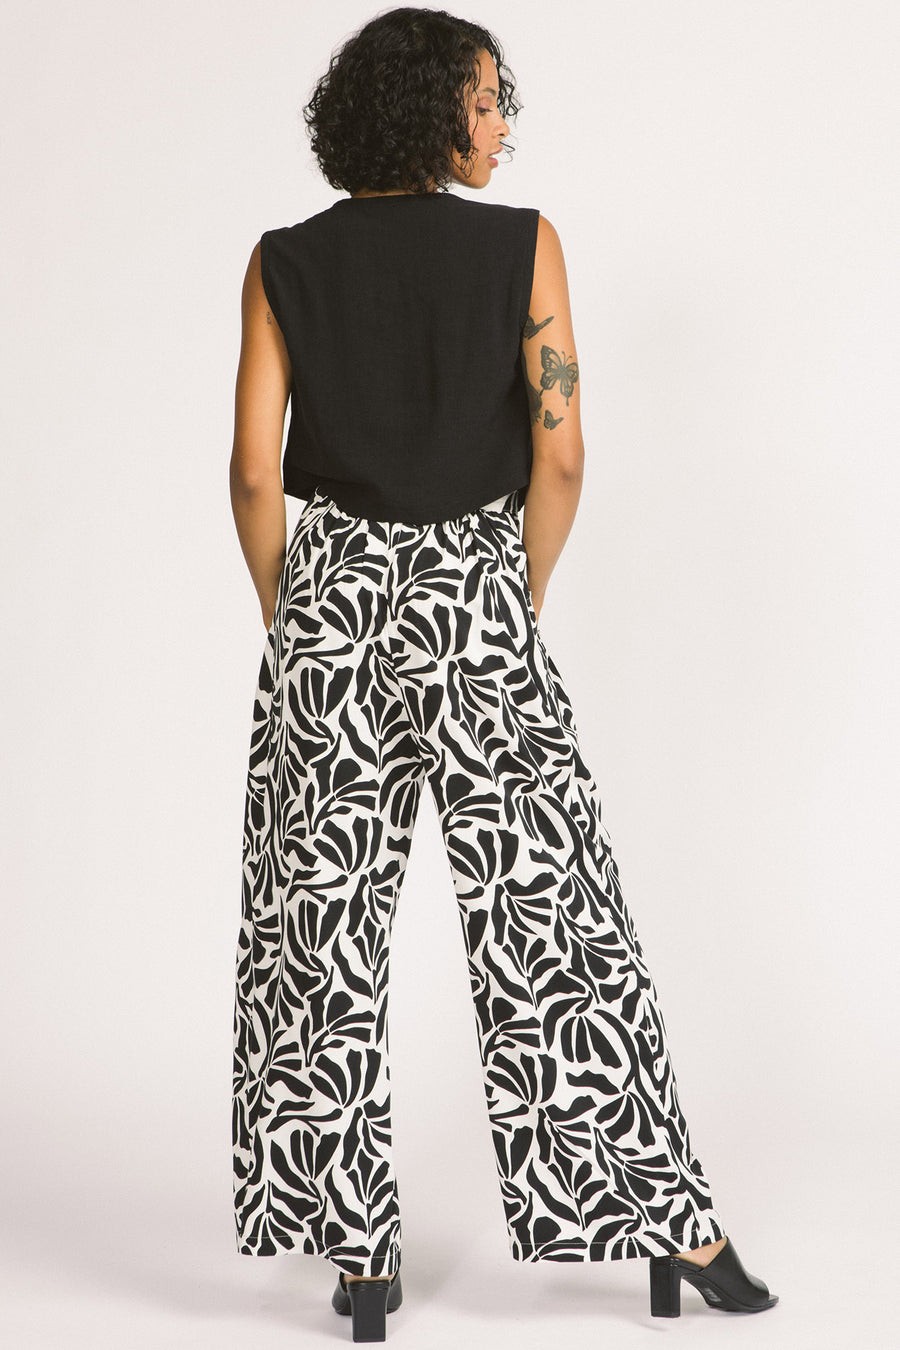 Back view of  women wearing black and white zebra leaf print Darcy pants by Allison Wonderland. 